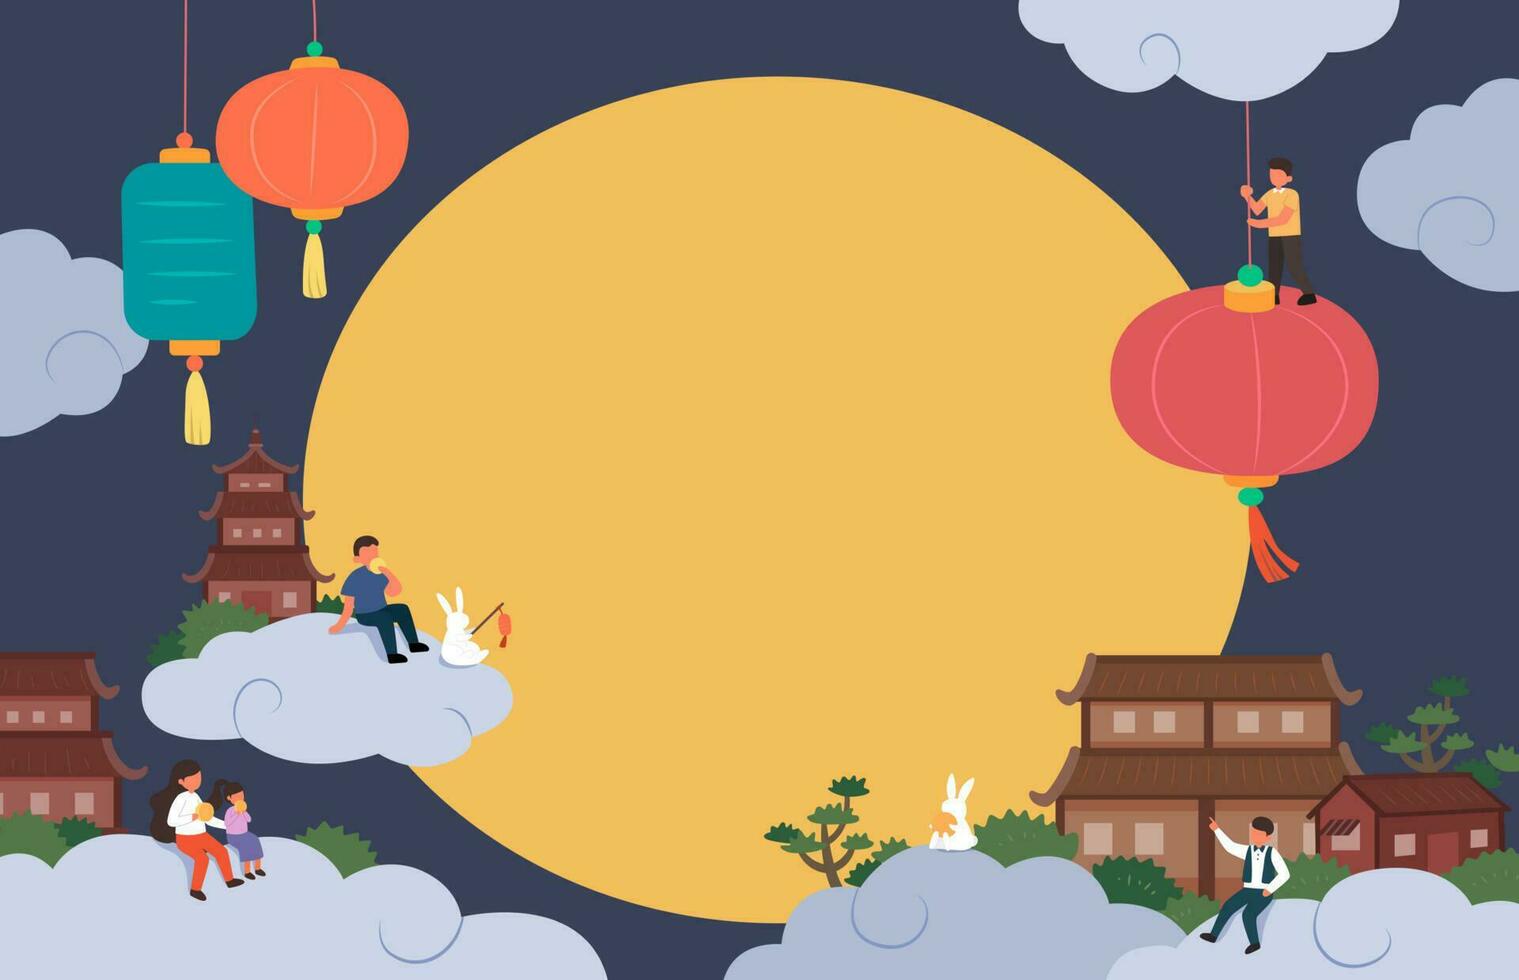 Mid autumn festival design. Flat illustration of Chinese people living on clouds watching full moon closely on mooncake festival vector